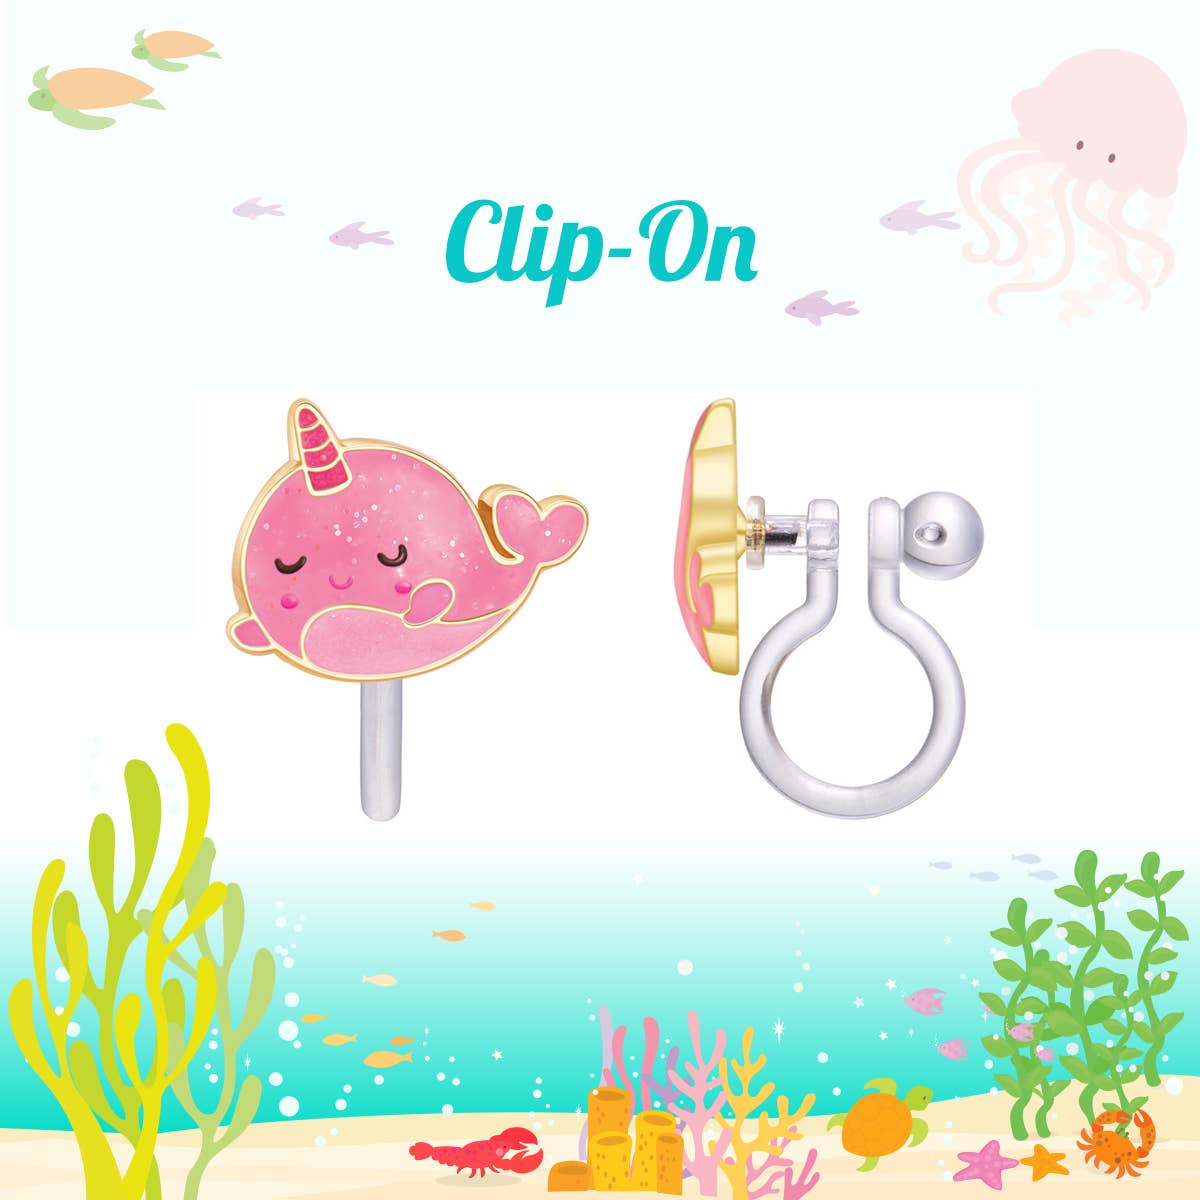 CLIP ON Cutie Earrings- Glitter Pink Narwhal